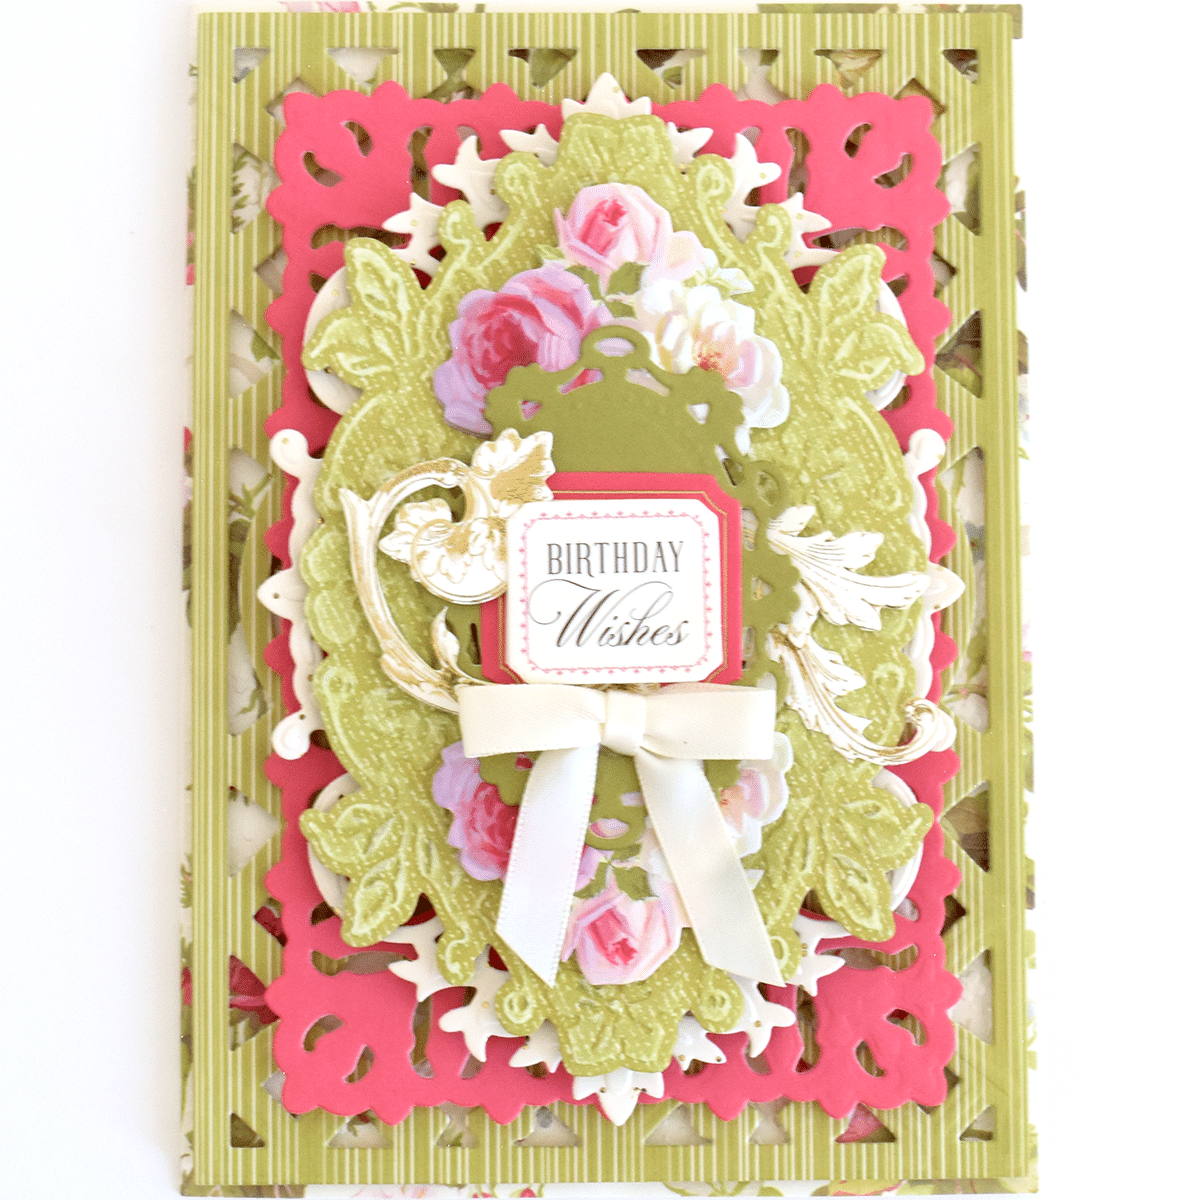 a birthday card with flowers and a bow.